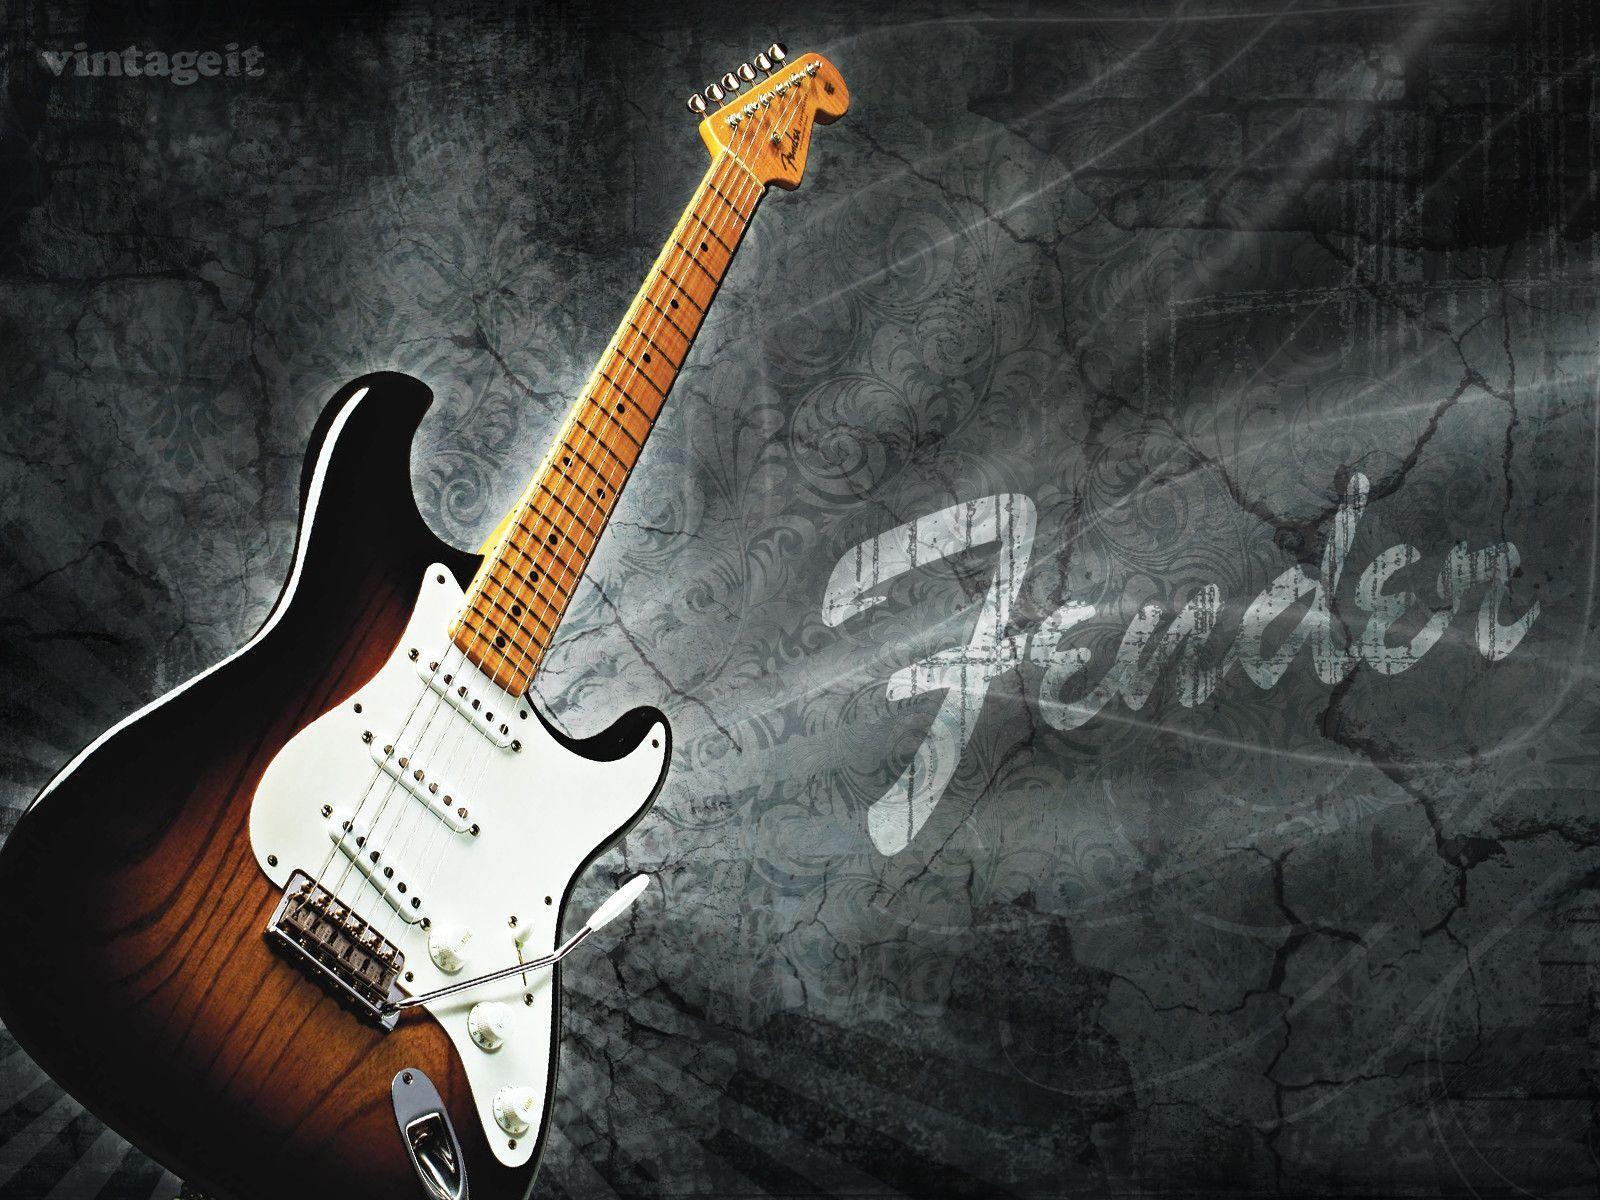 Fender Stratocaster Wallpapers - Wallpaper Cave